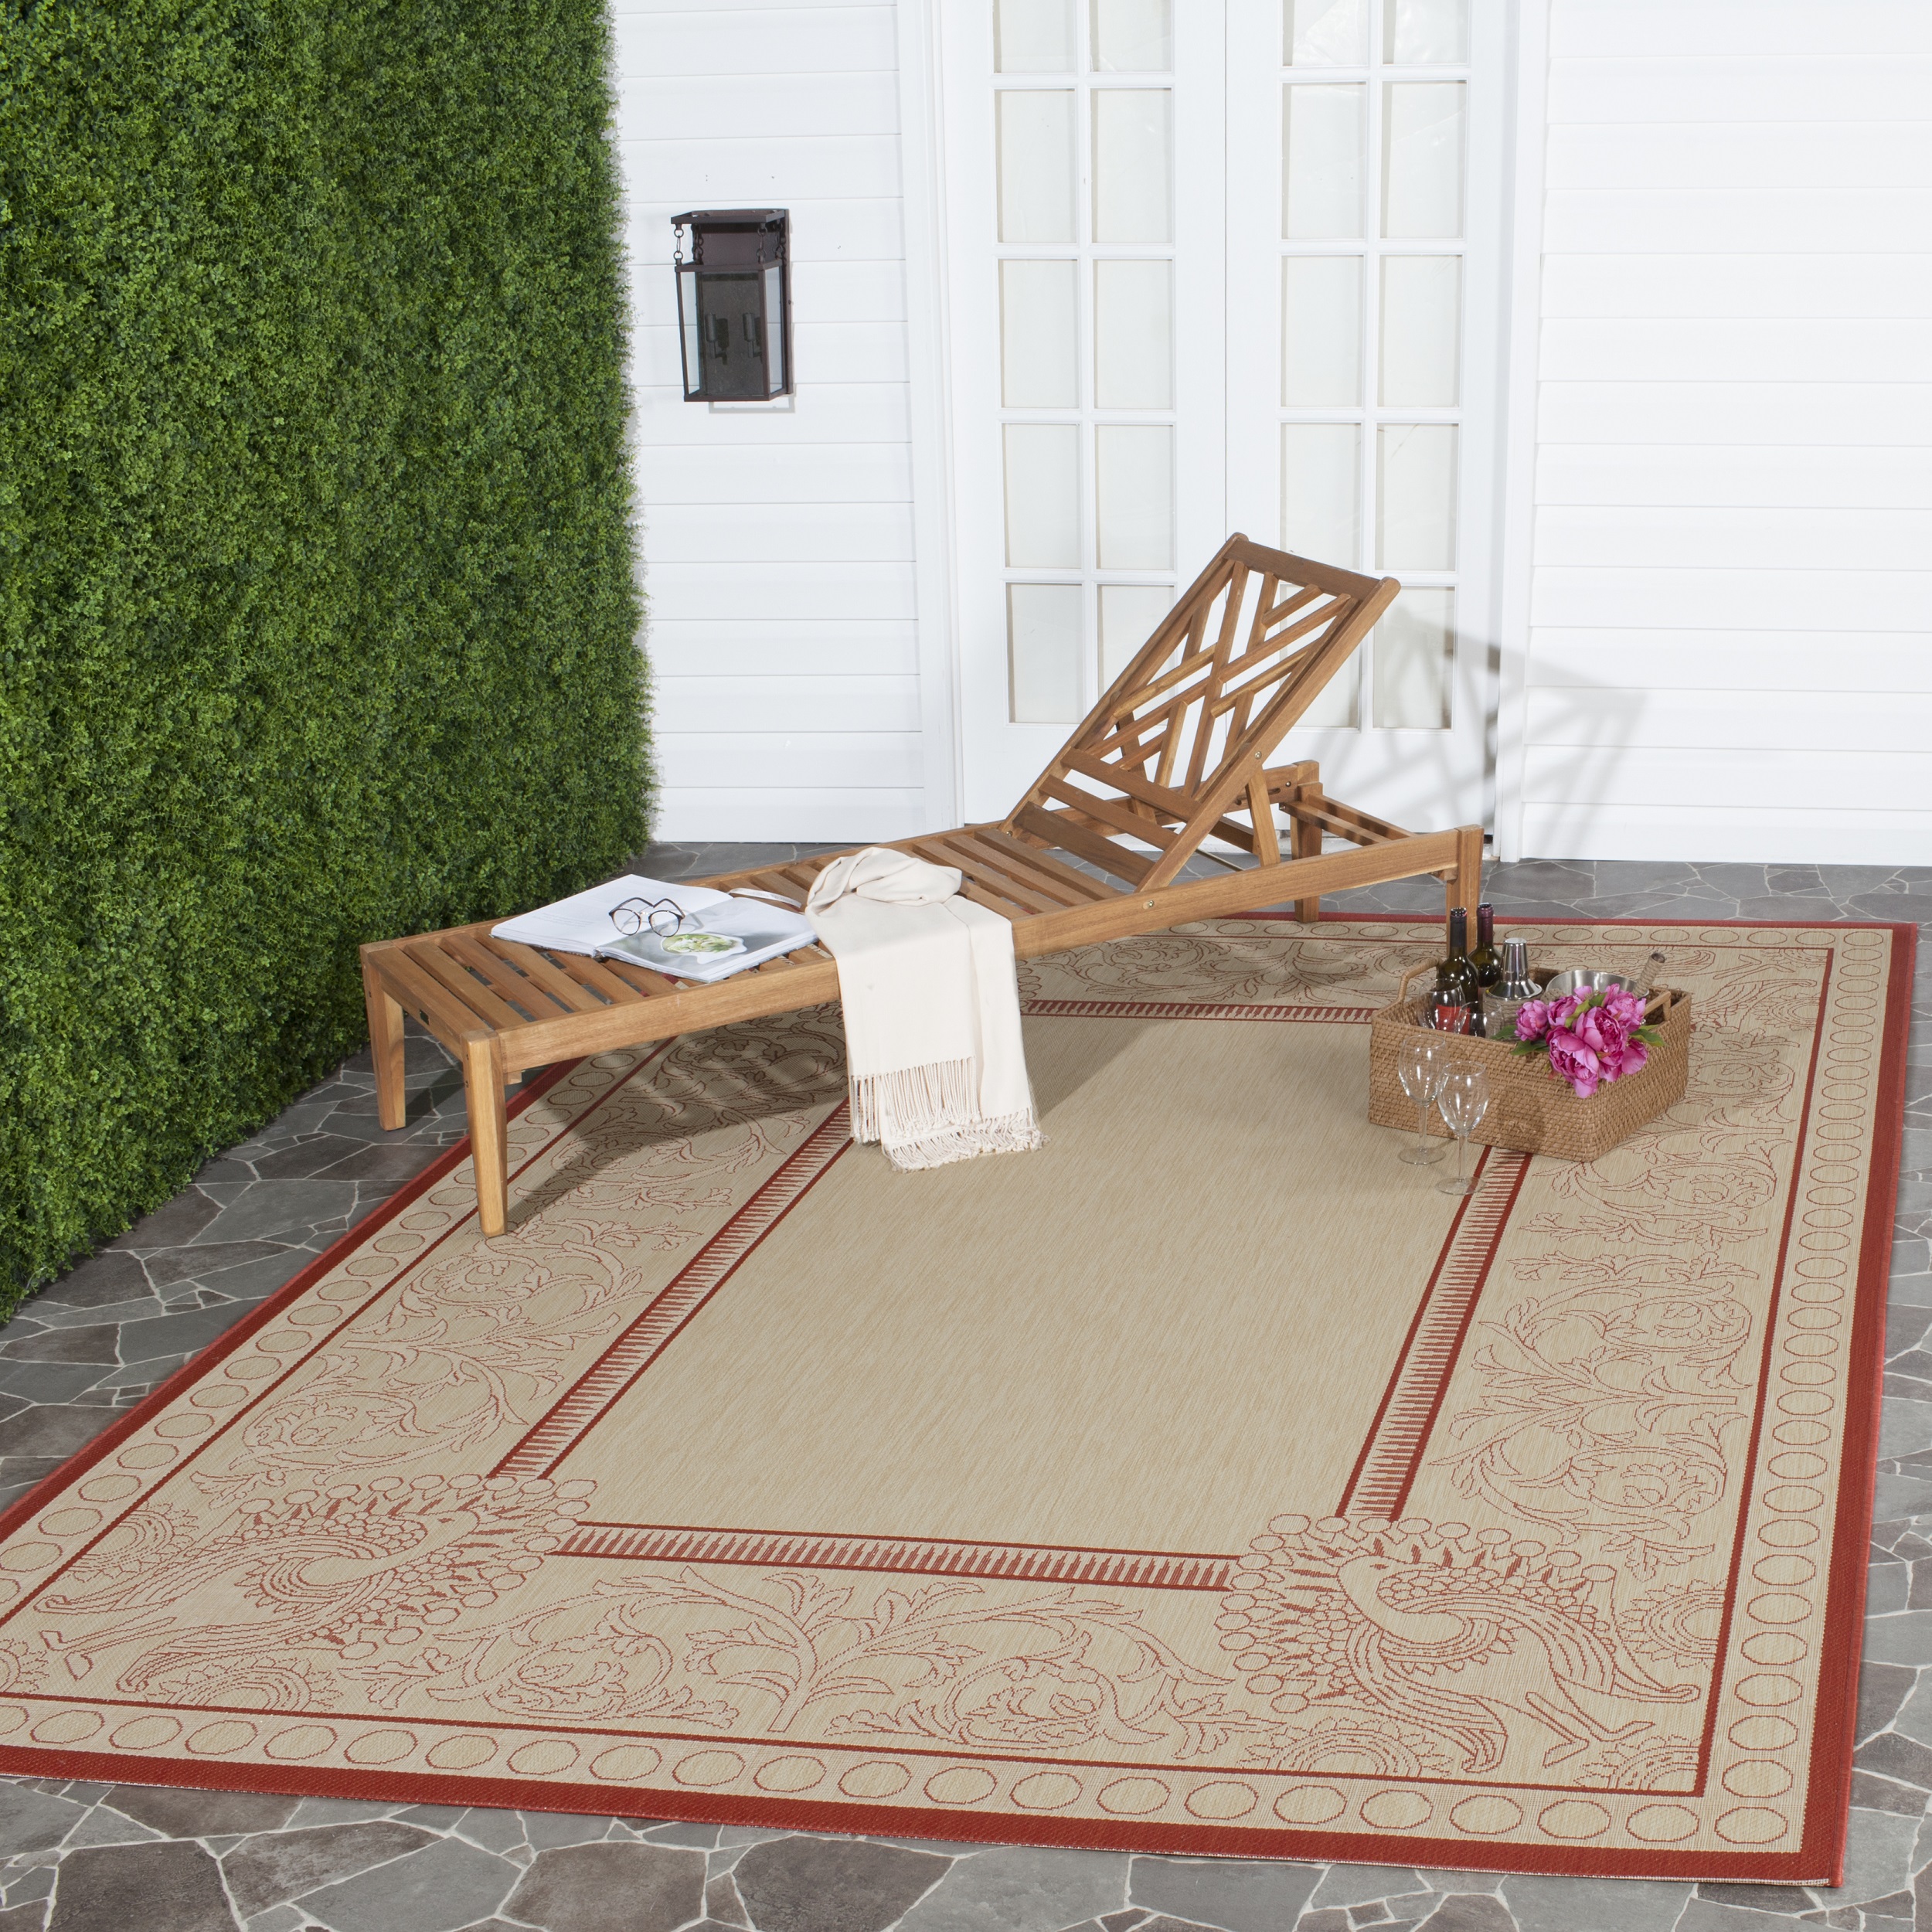 SAFAVIEH Courtyard Cooper Floral Indoor/Outdoor Area Rug, 6'7" x 6'7" Square, Natural/Red - image 1 of 7